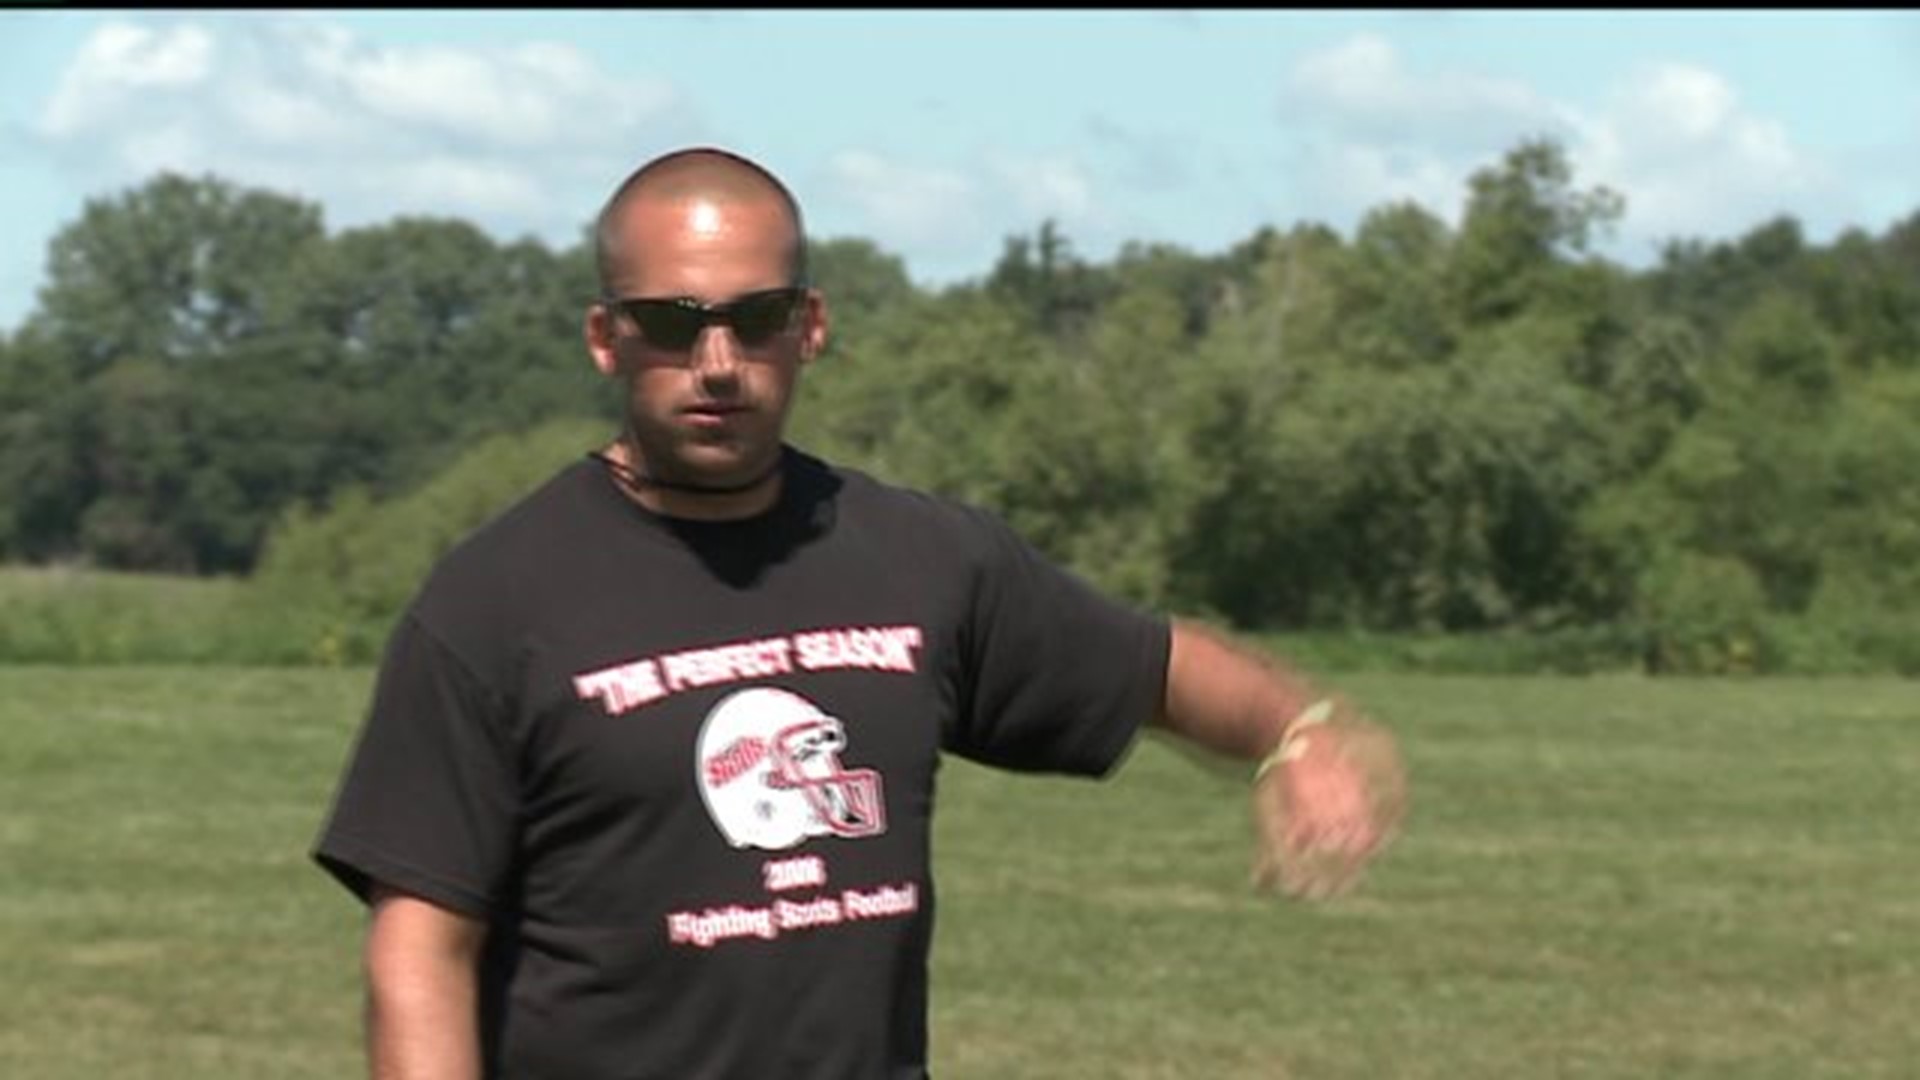 Score Pigskin Preview- Adams hopes to get alma mater over hump at Sherrard